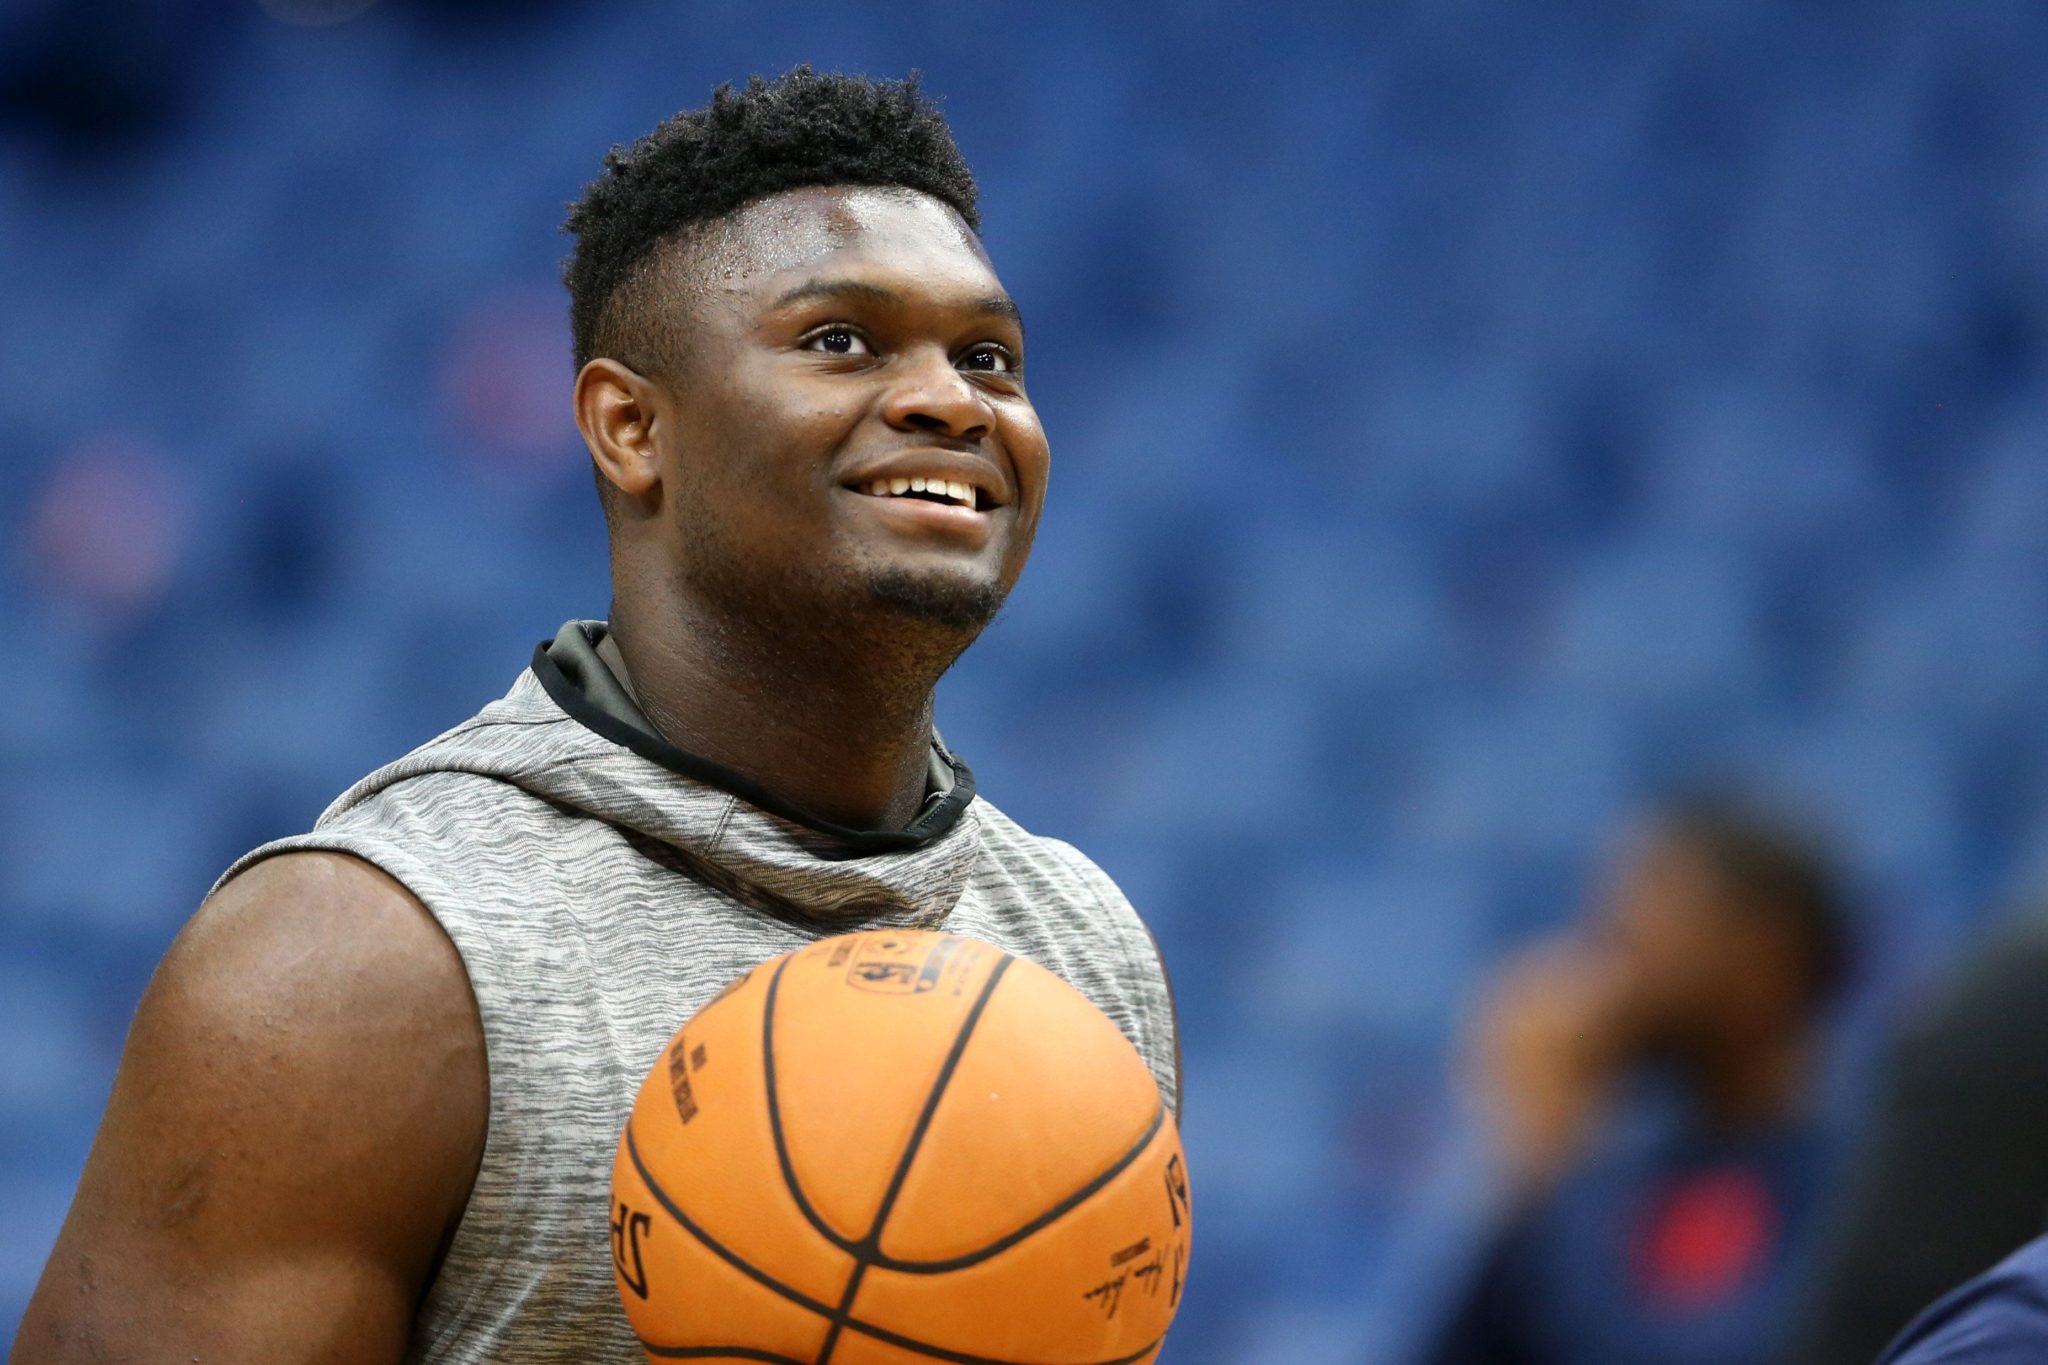 Mountain Dew’s Five Year Deal With Zion Williamson!!!